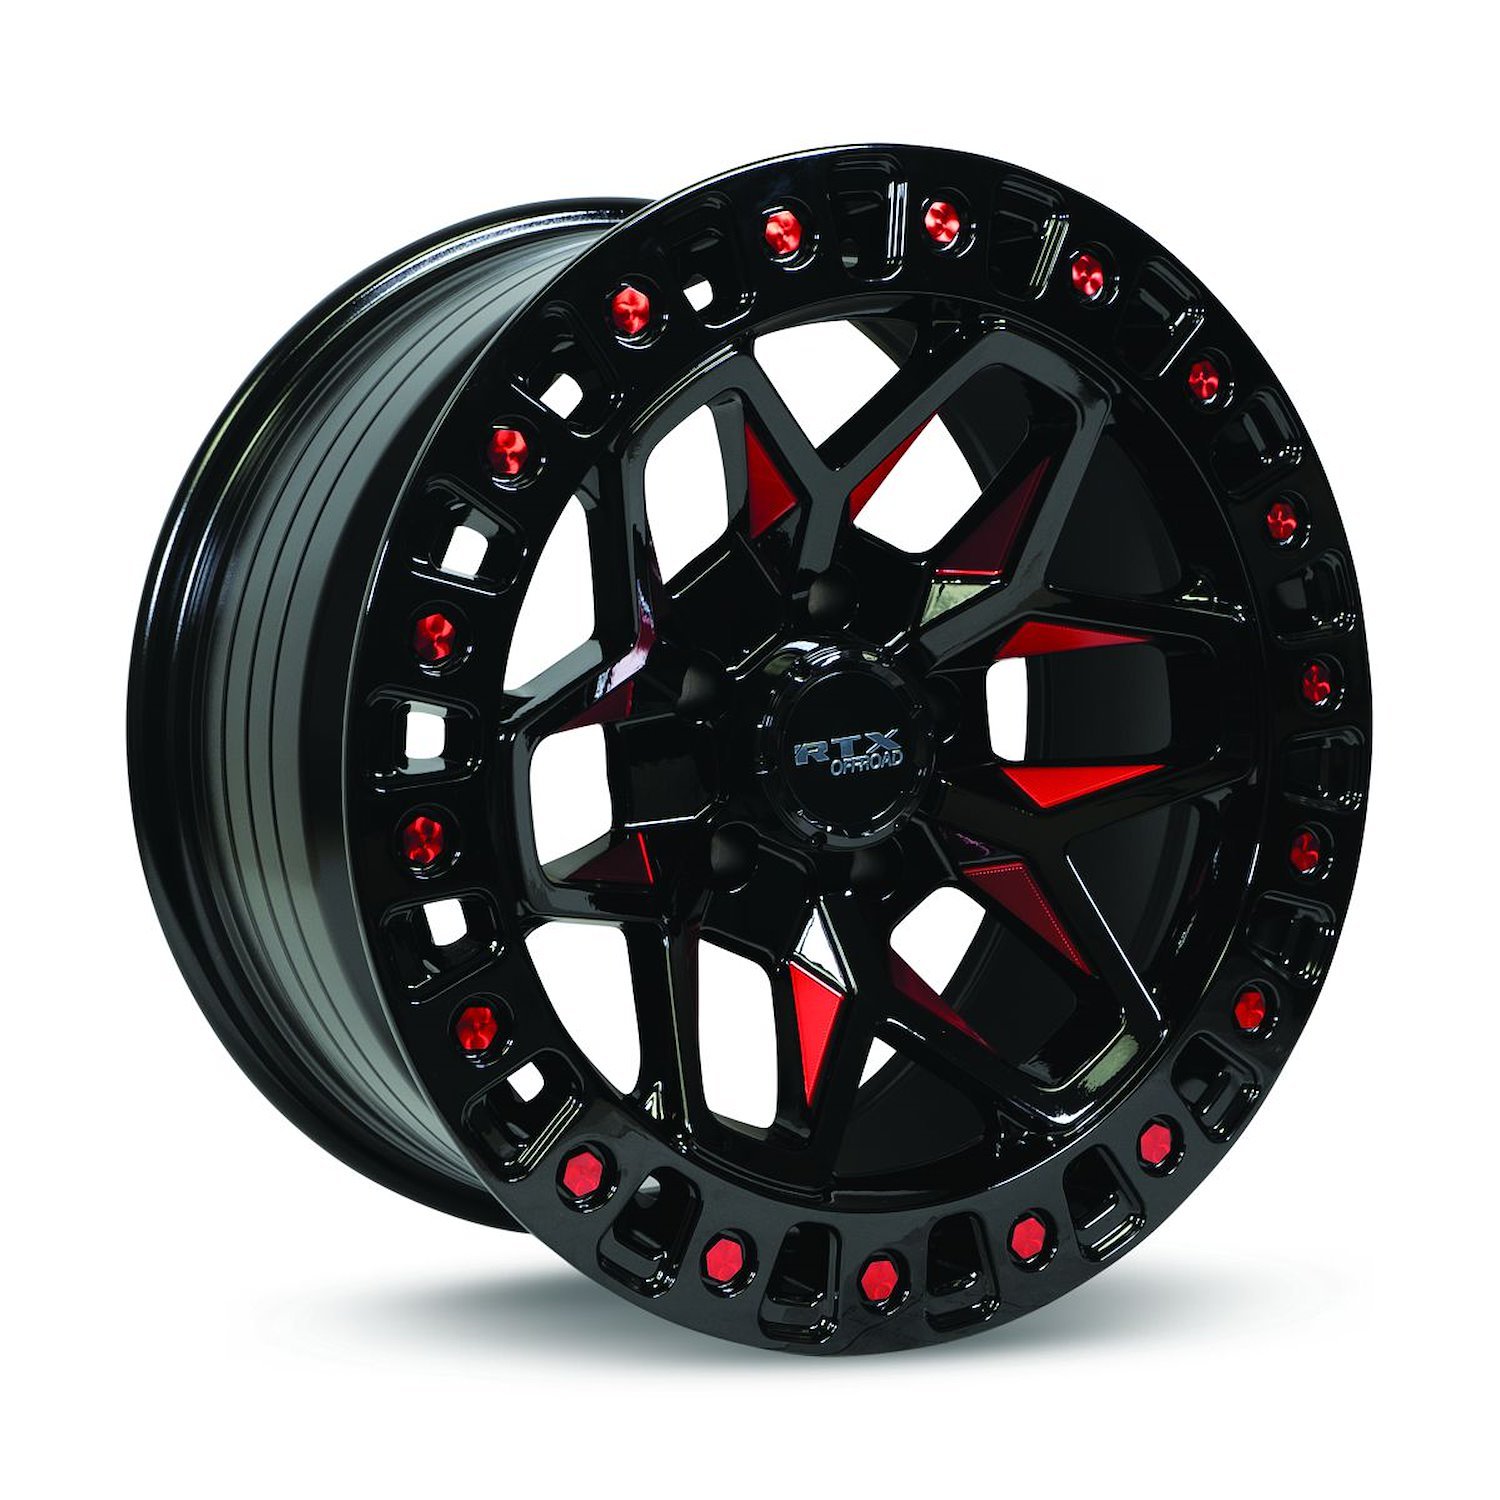 082931 Off-Road Series Zion Wheel [Size: 18" x 9"] Black Milled Red Finish